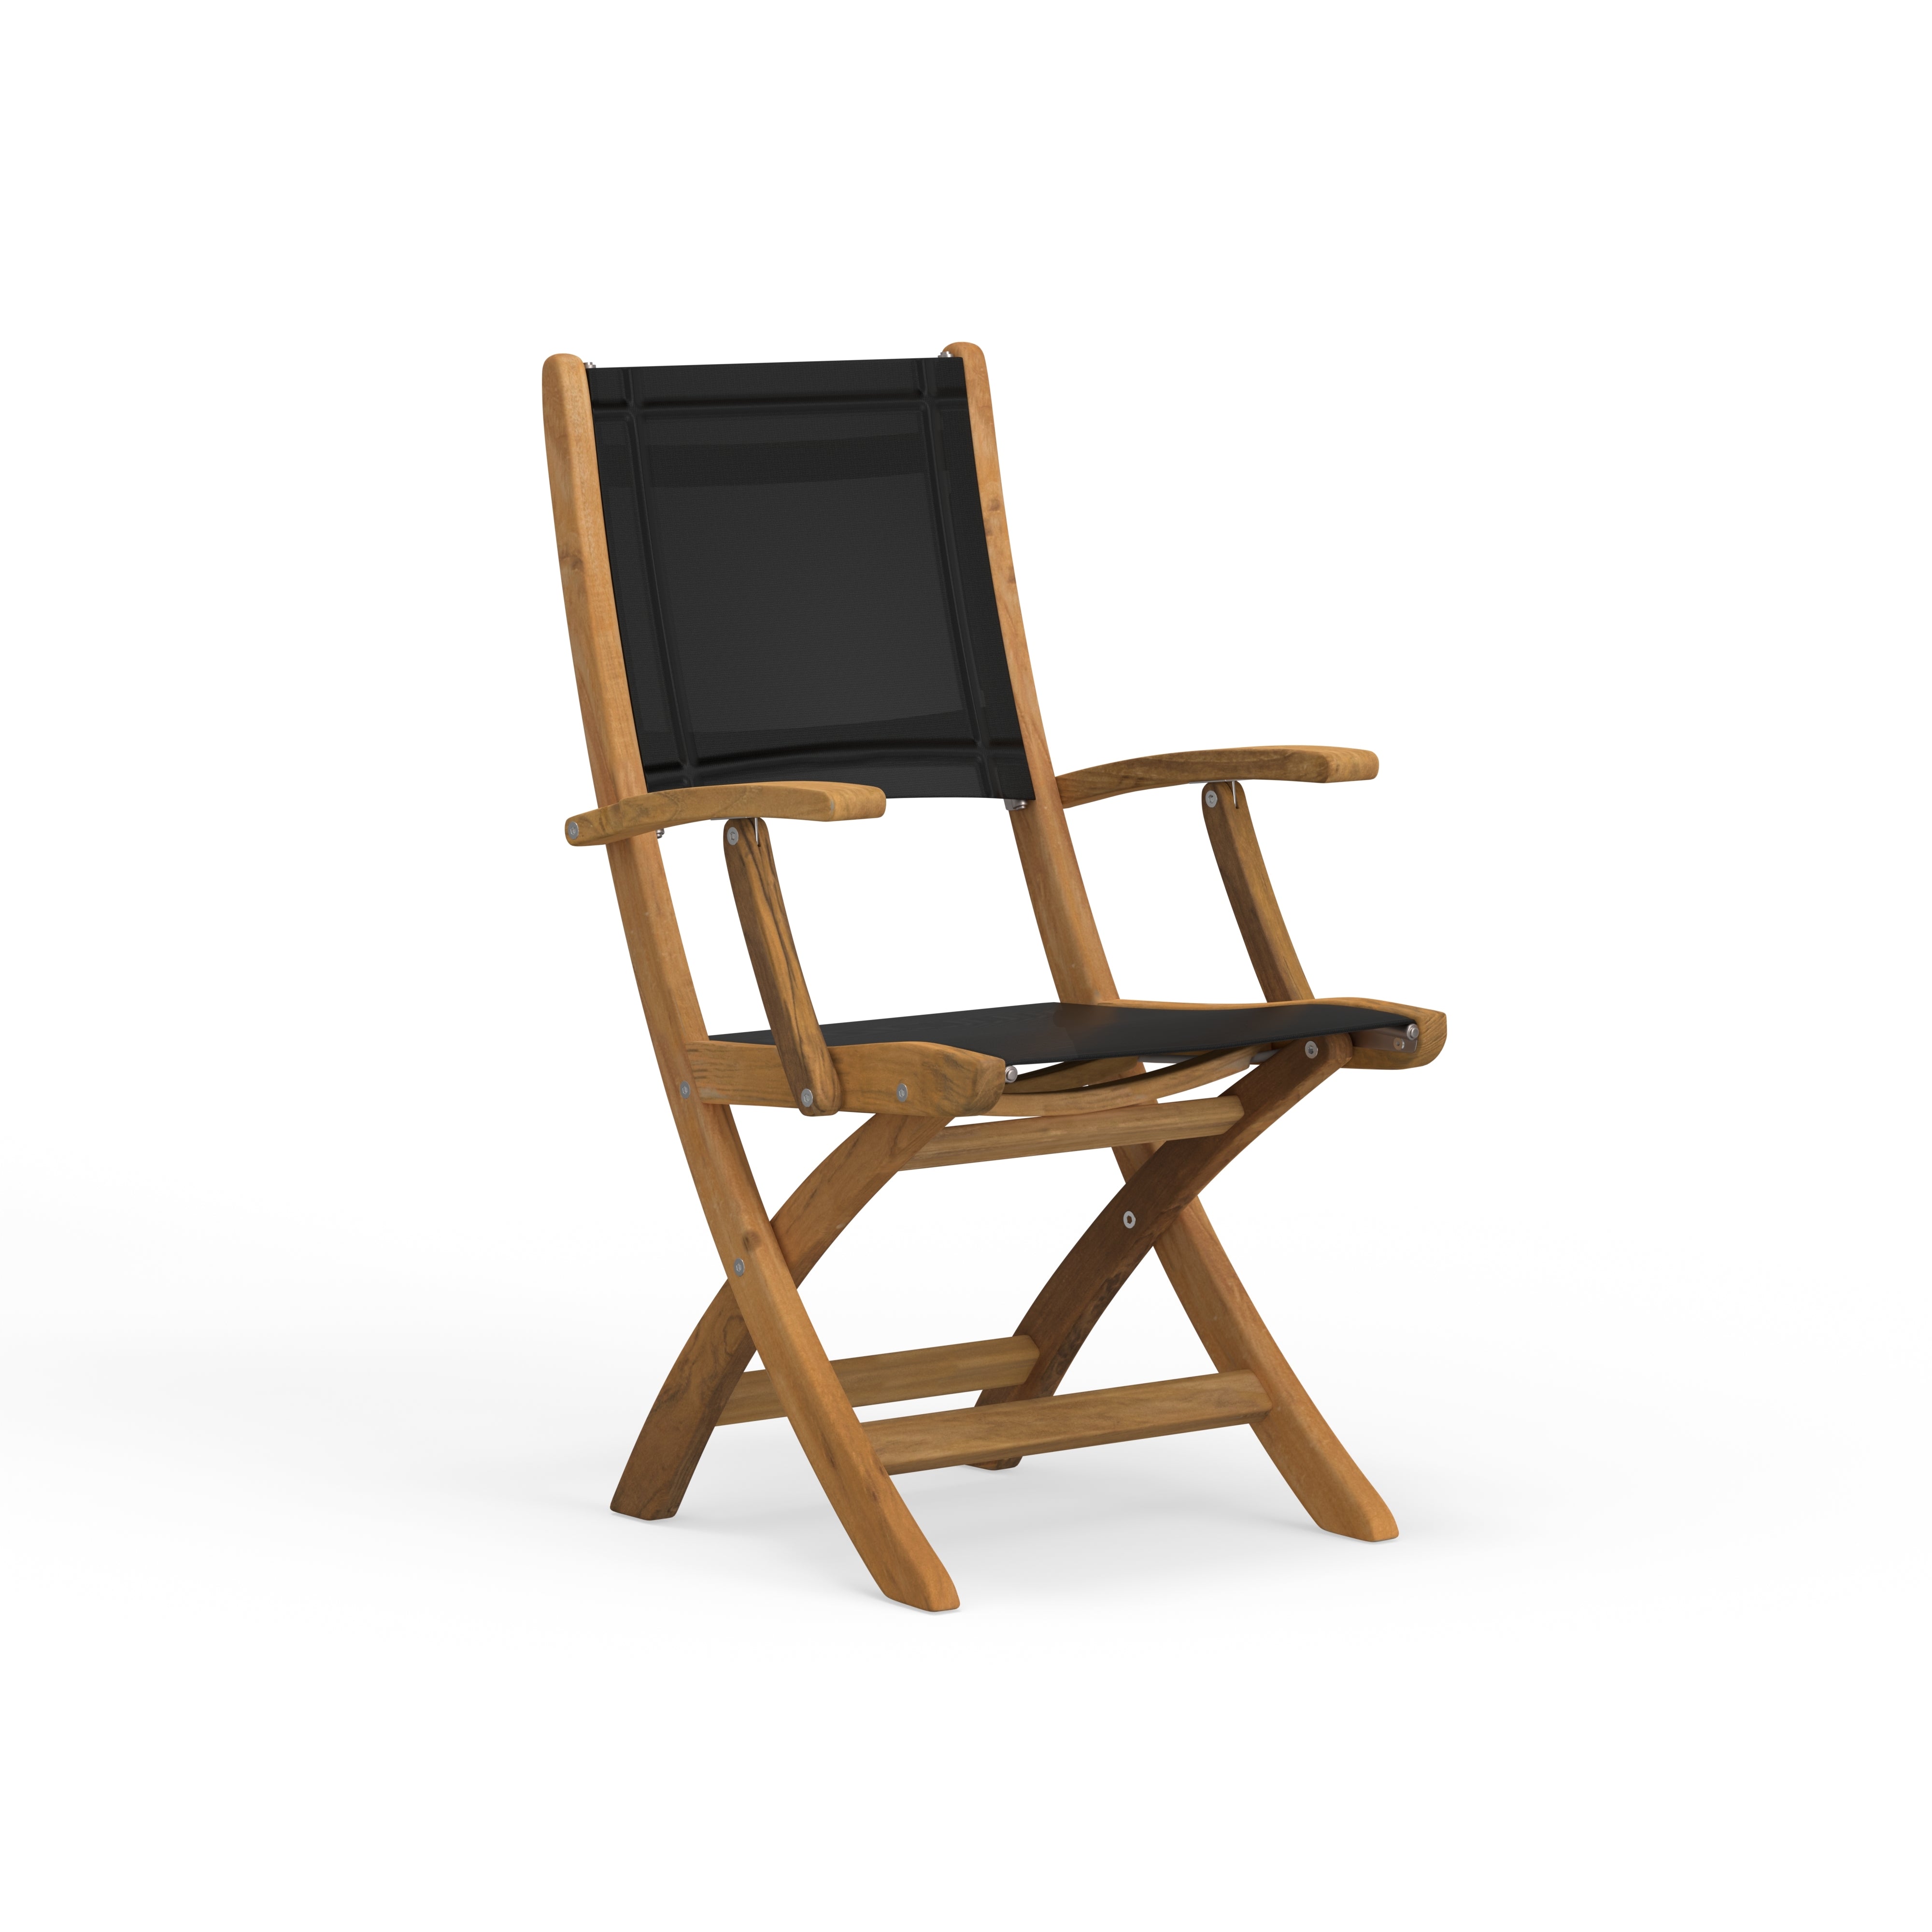 Modern Teak Folding Chairs With Dining Table Package Available Now